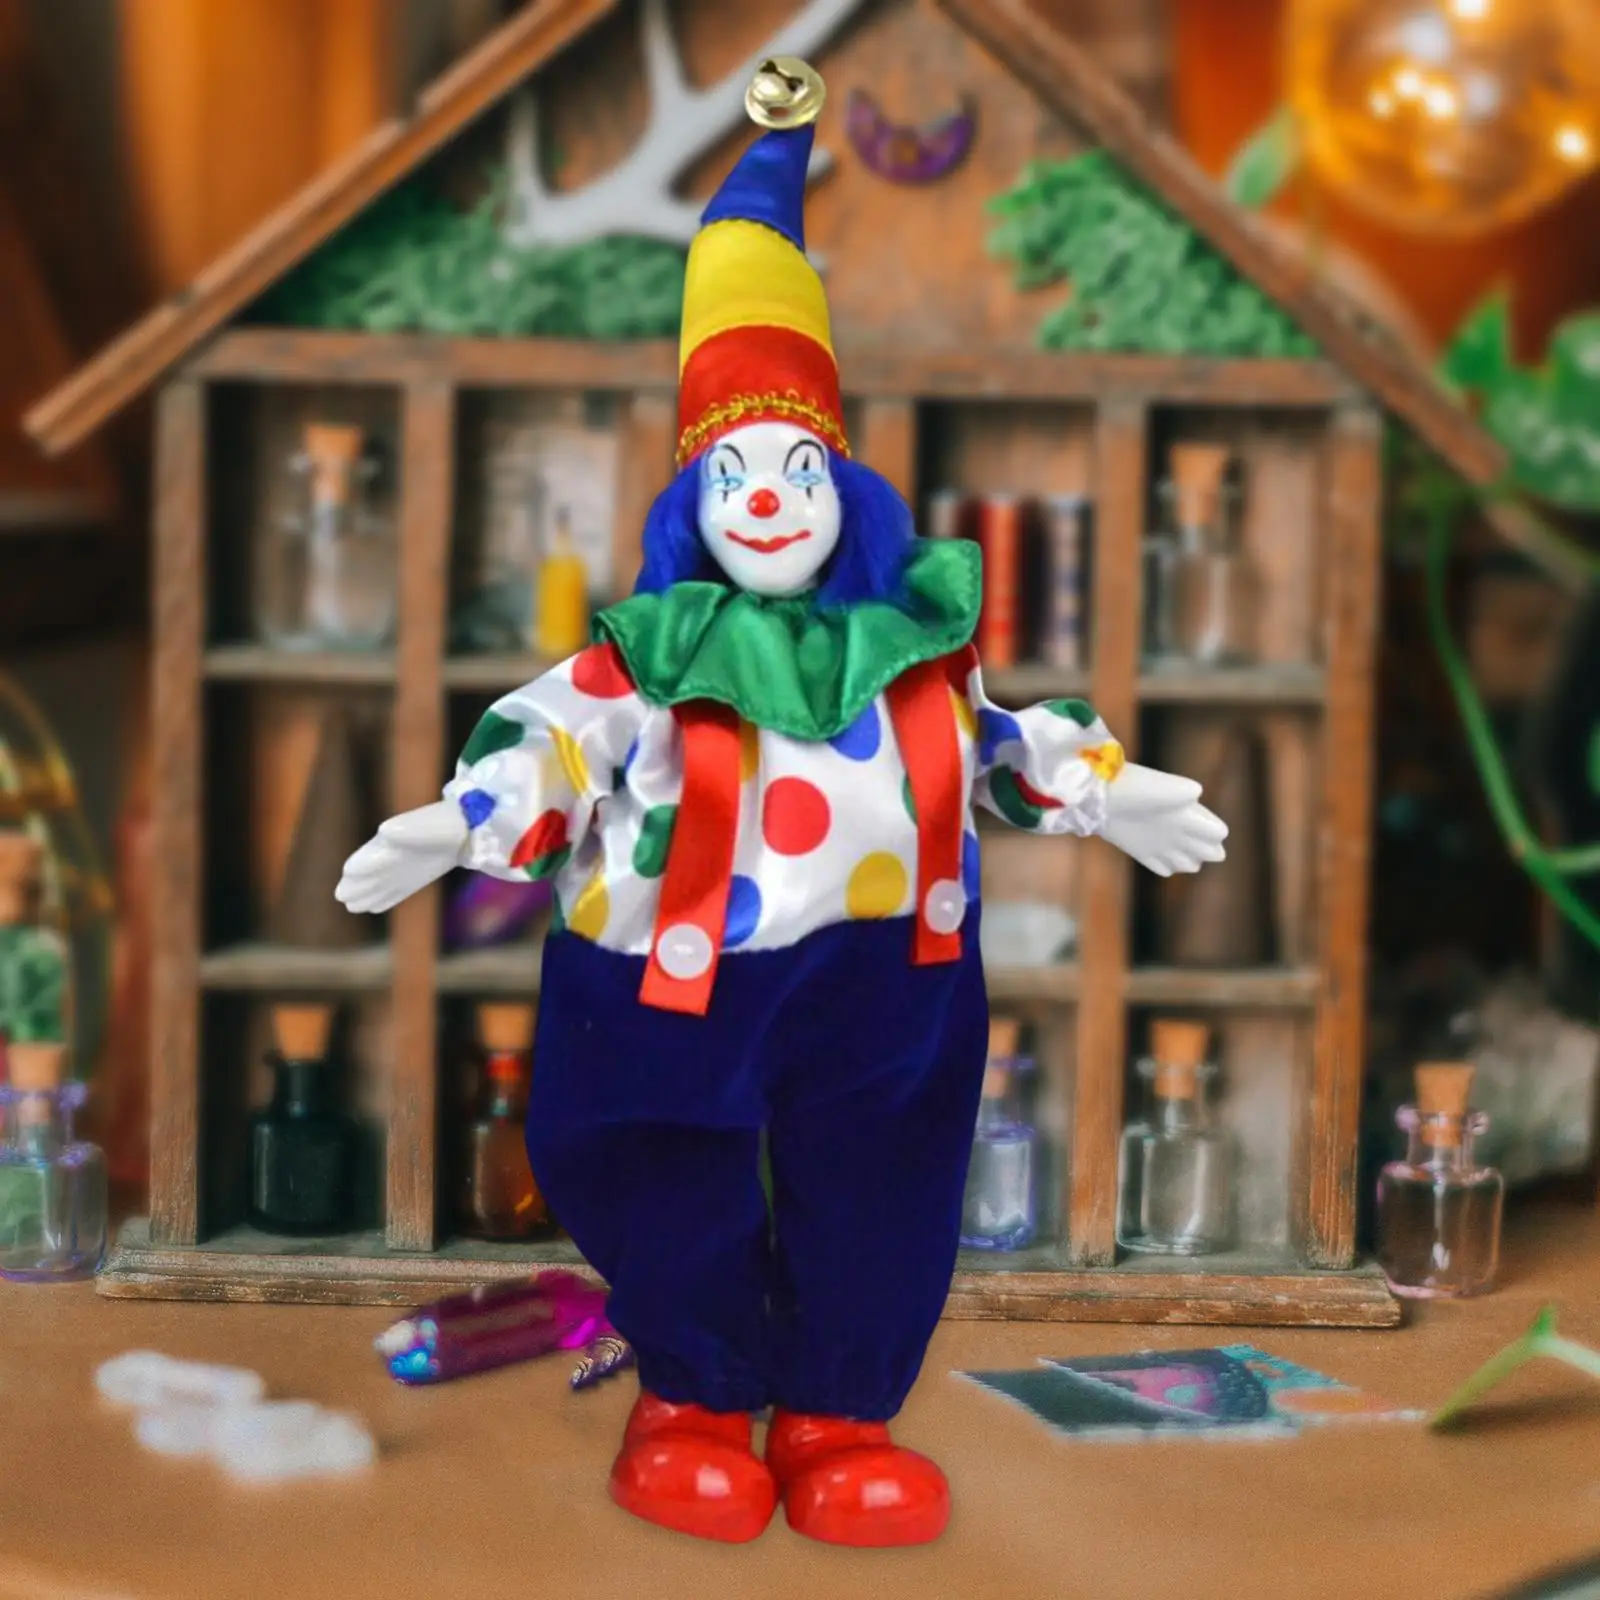 Clown Doll Can Sit & Stand Decoration Crafts for Party Favors Valentin Gift